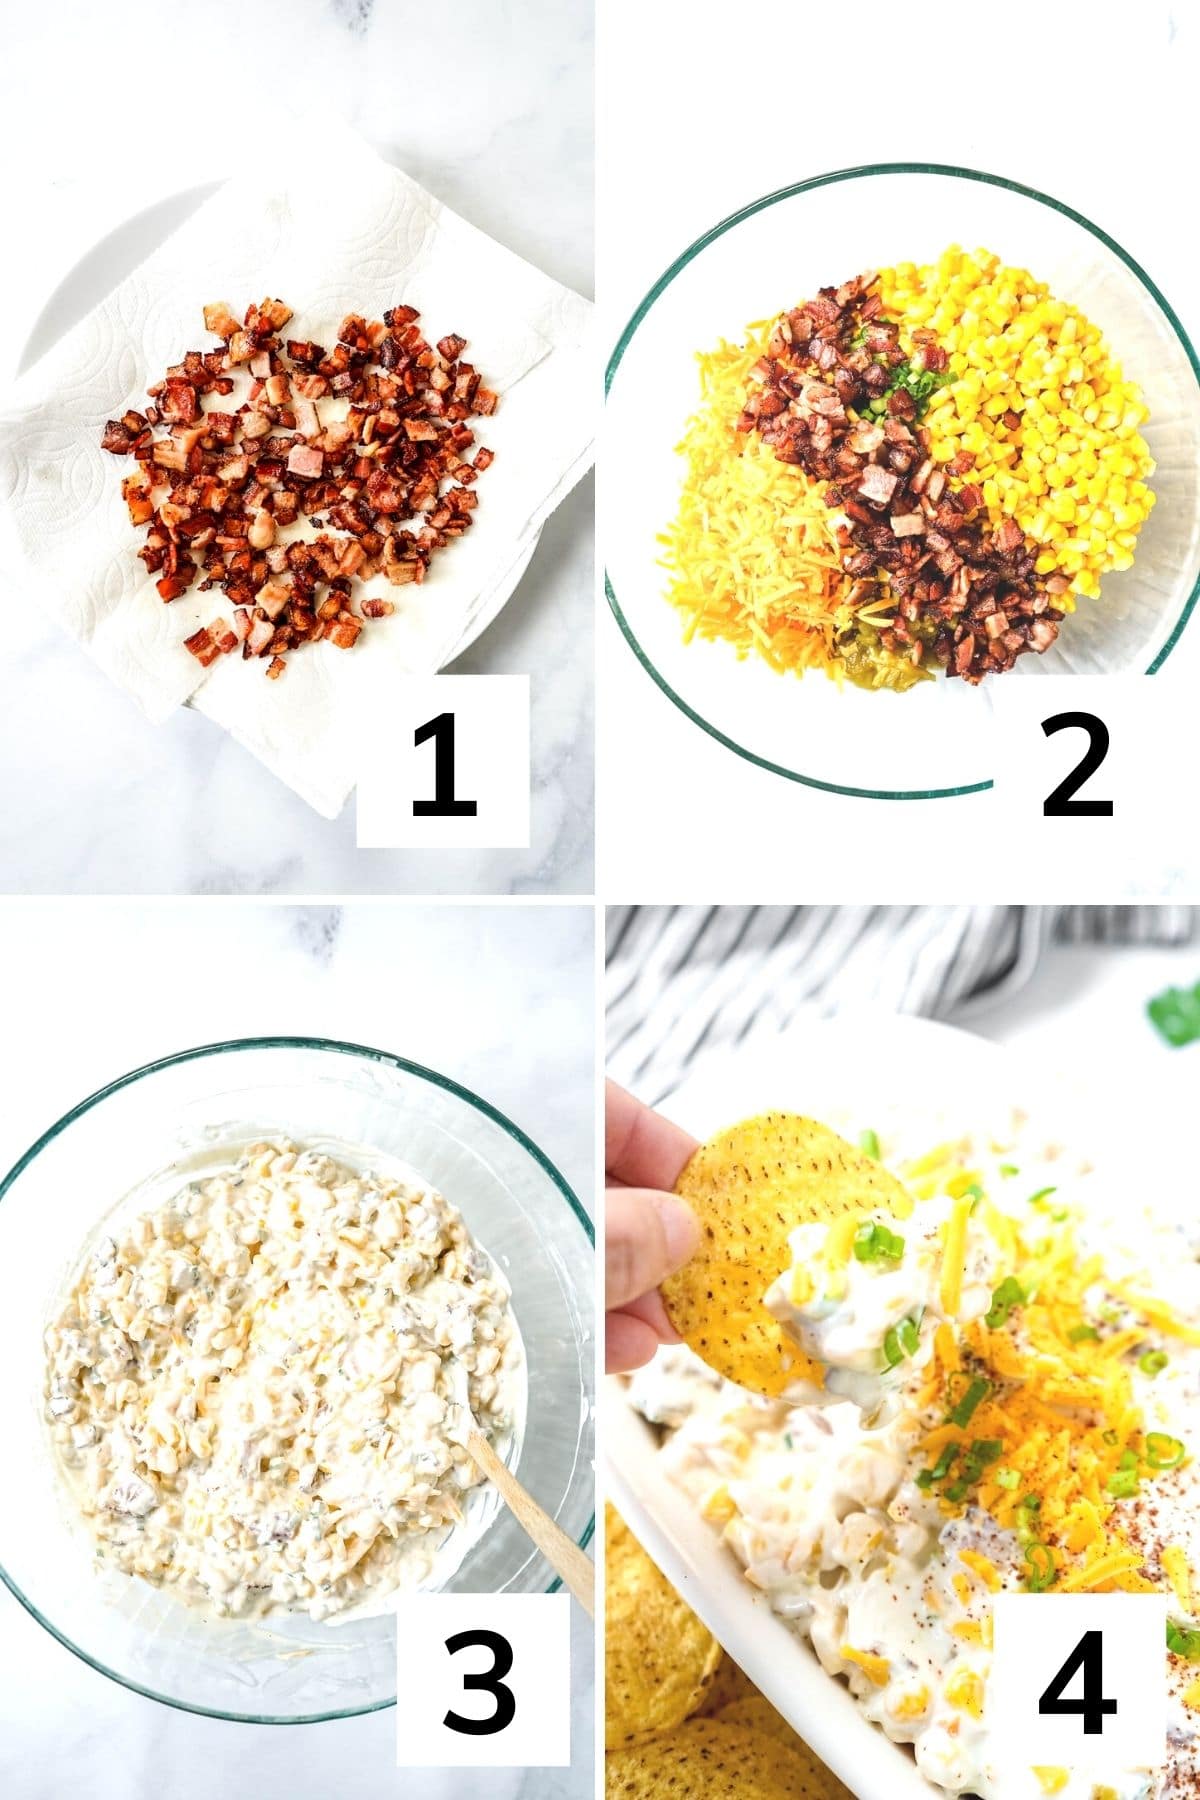 How to make bacon and corn crack dip step by step.